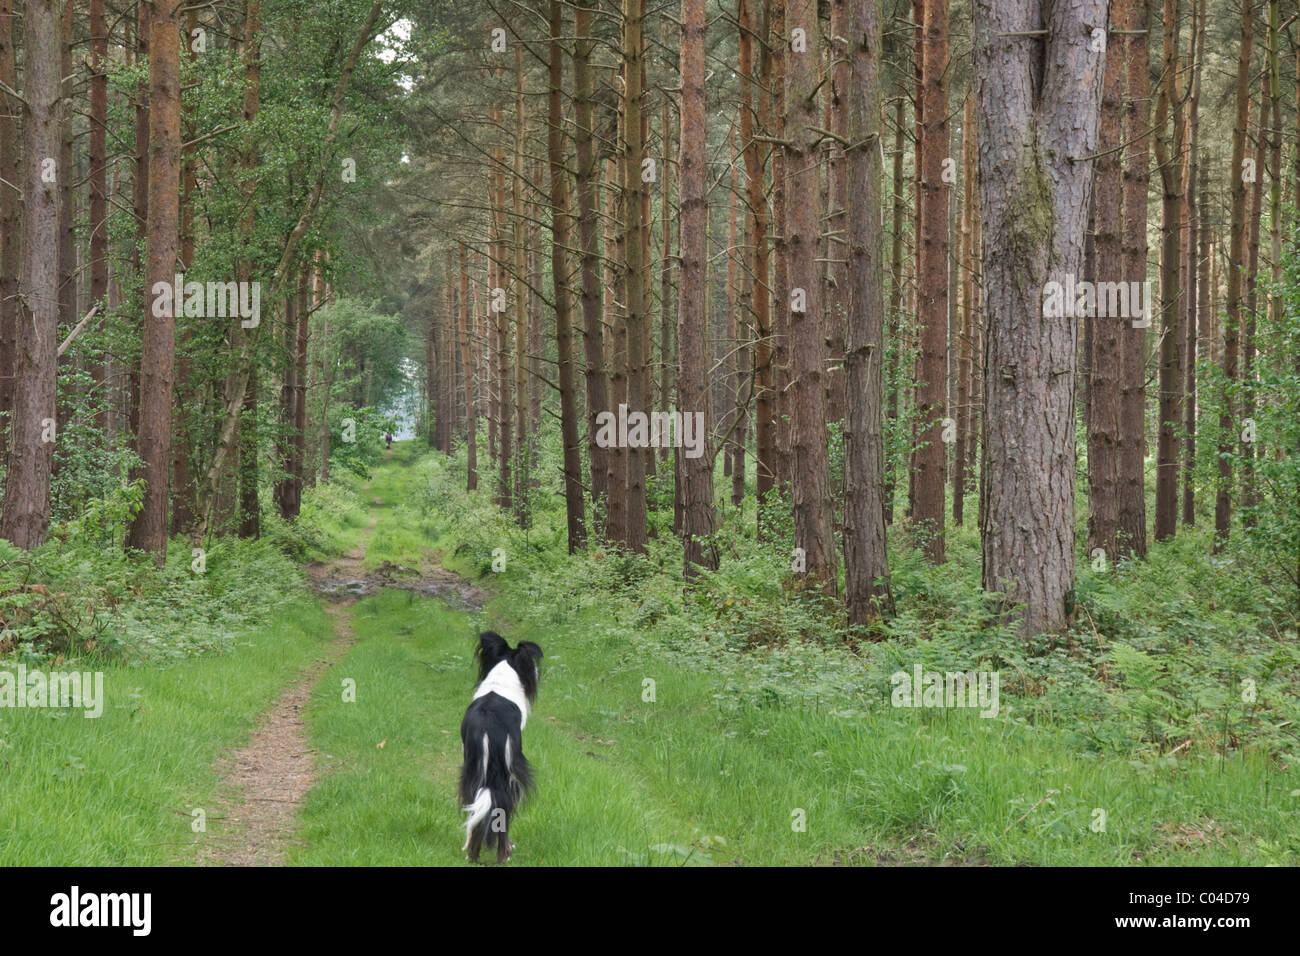 Young Border Collie looking into a forest ride at Clumber Park, Nottinghamshire. Stock Photo